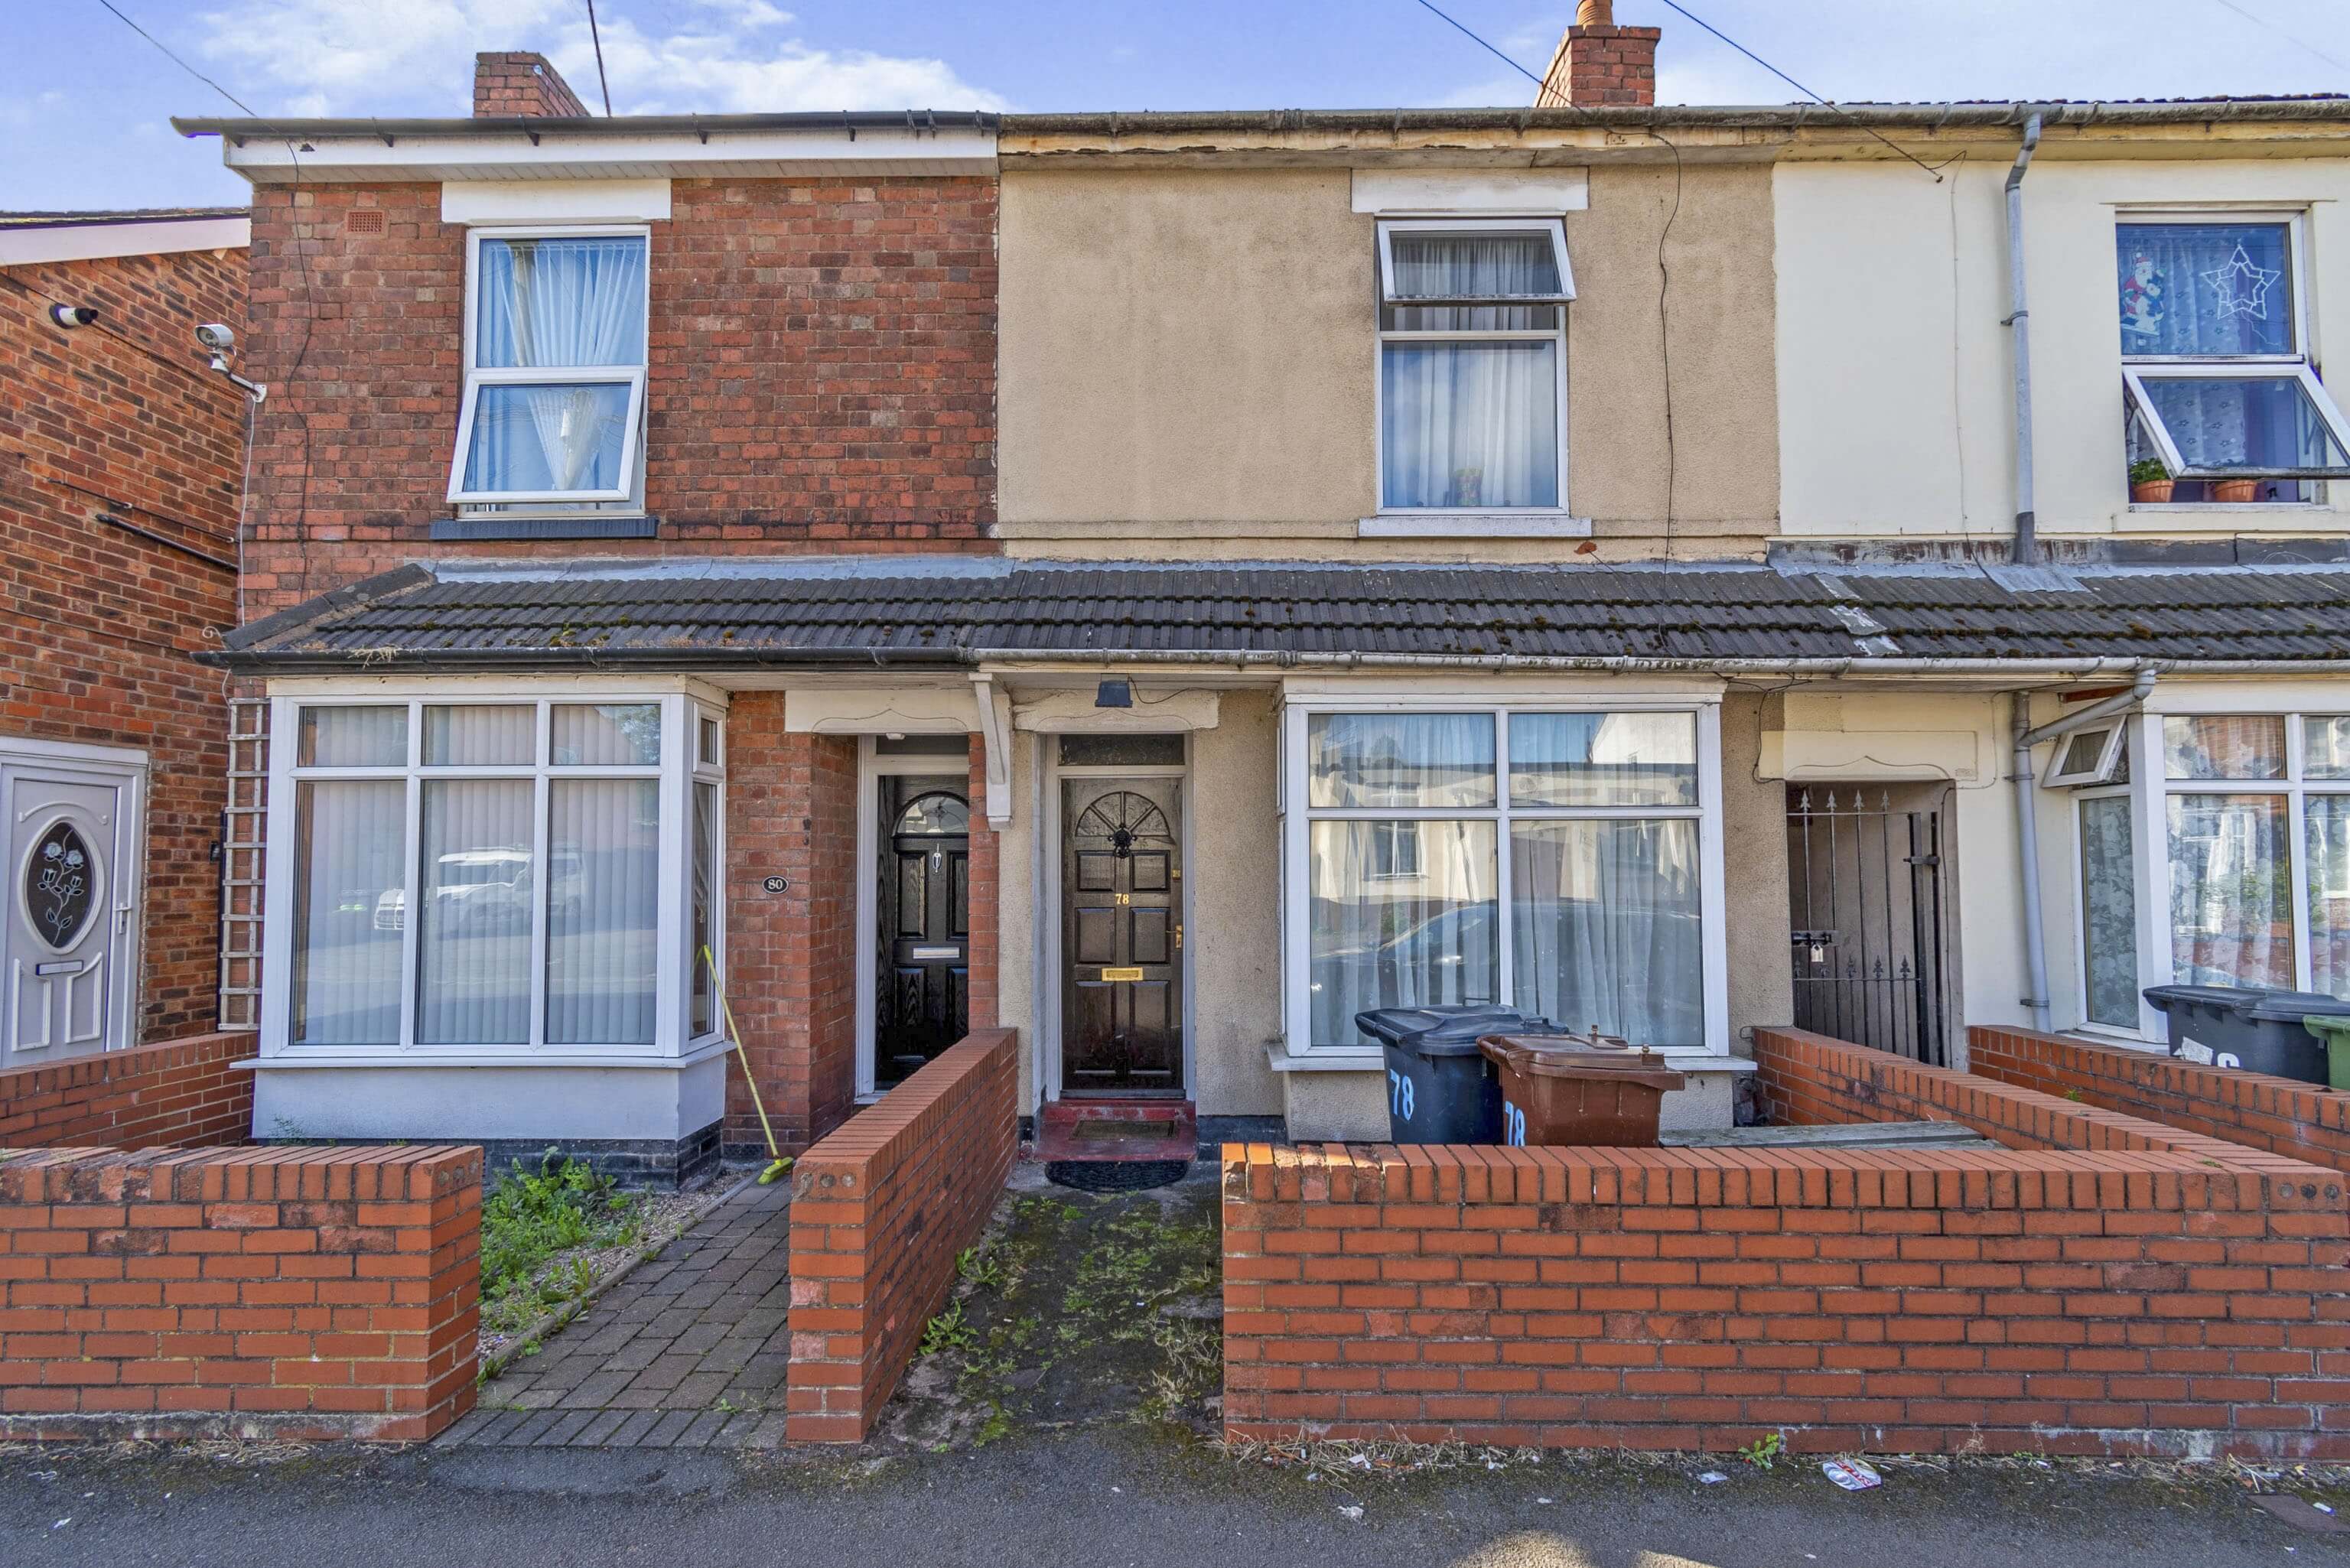 3 Bedroom House for Sale in Bolton Road, Wednesfield